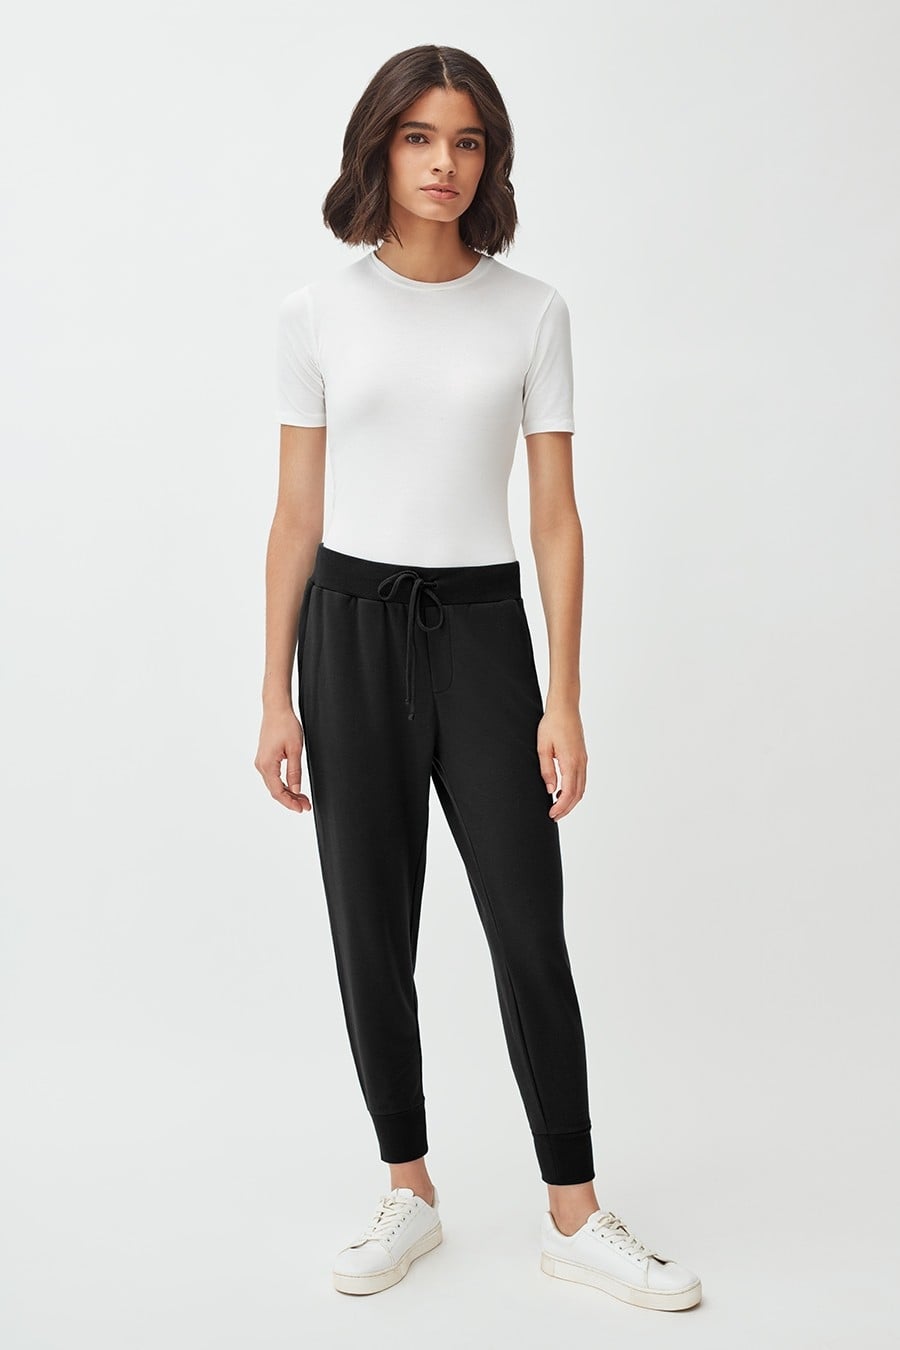 Cuyana French Terry Tapered Lounge Pants, Cuyana Makes Comfy Clothes and  Useful Bags, and These Are the 17 Things I Want